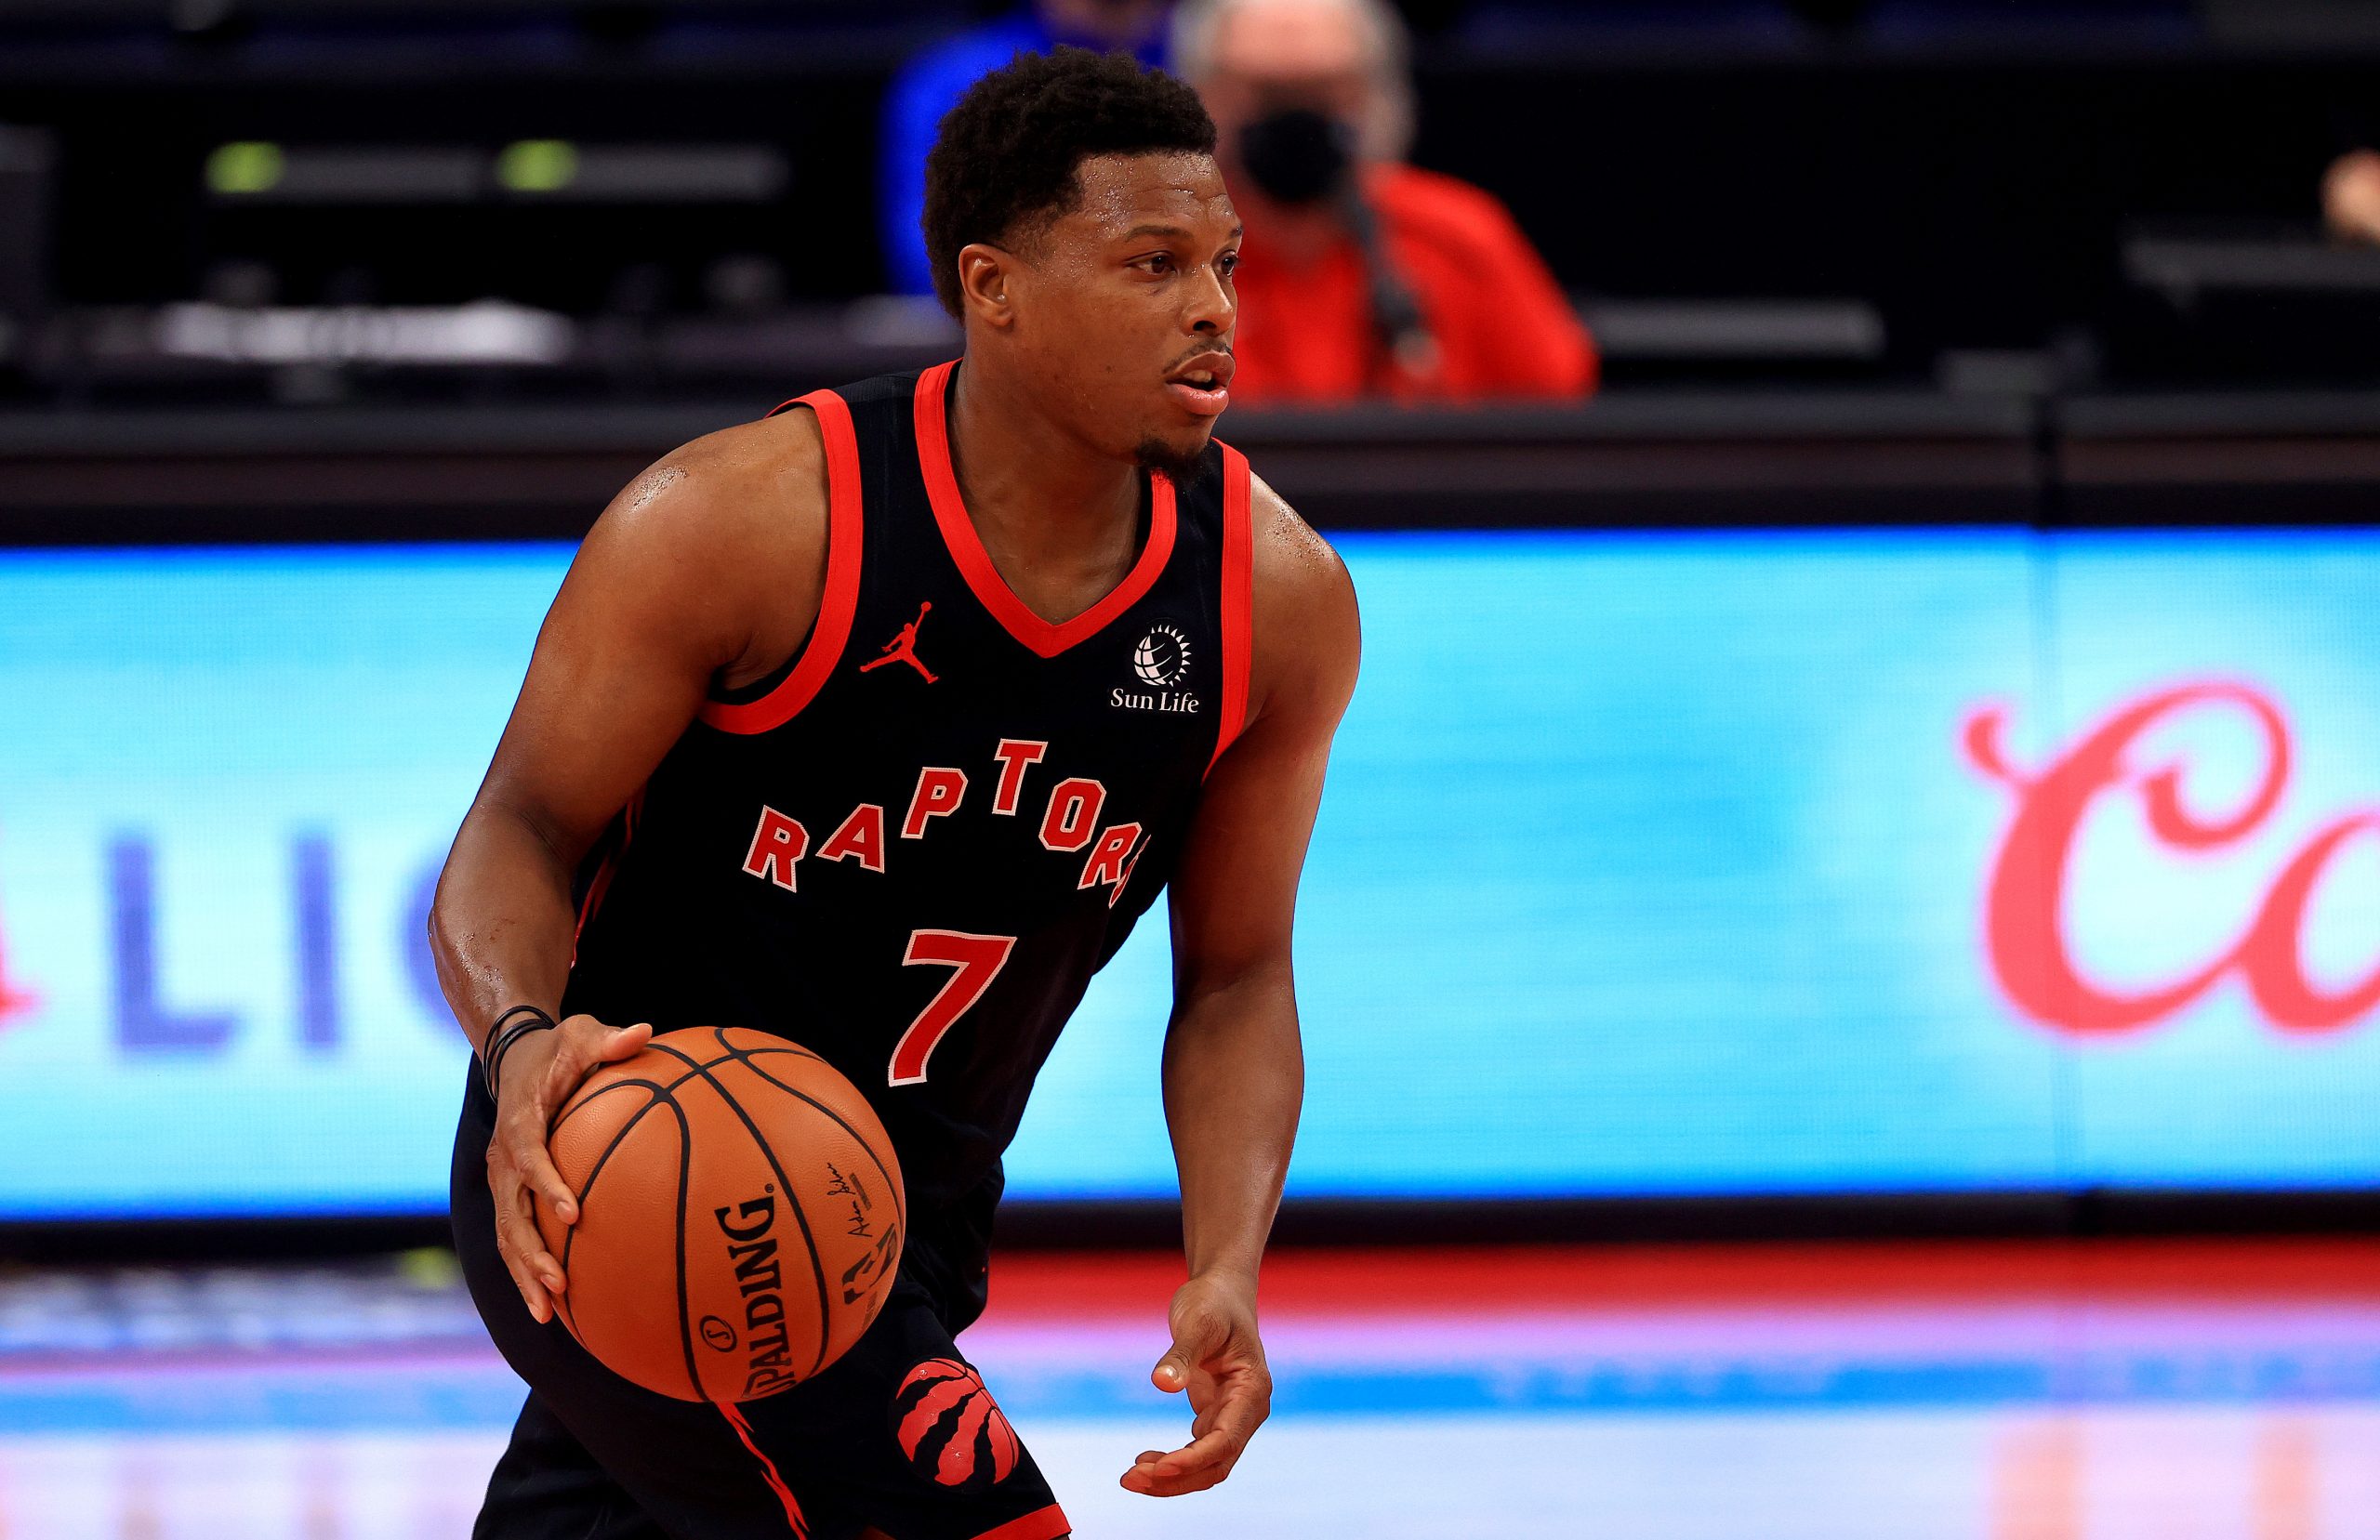 Kyle Lowry 2021 - Net Worth, Salary, Records, and Endorsements